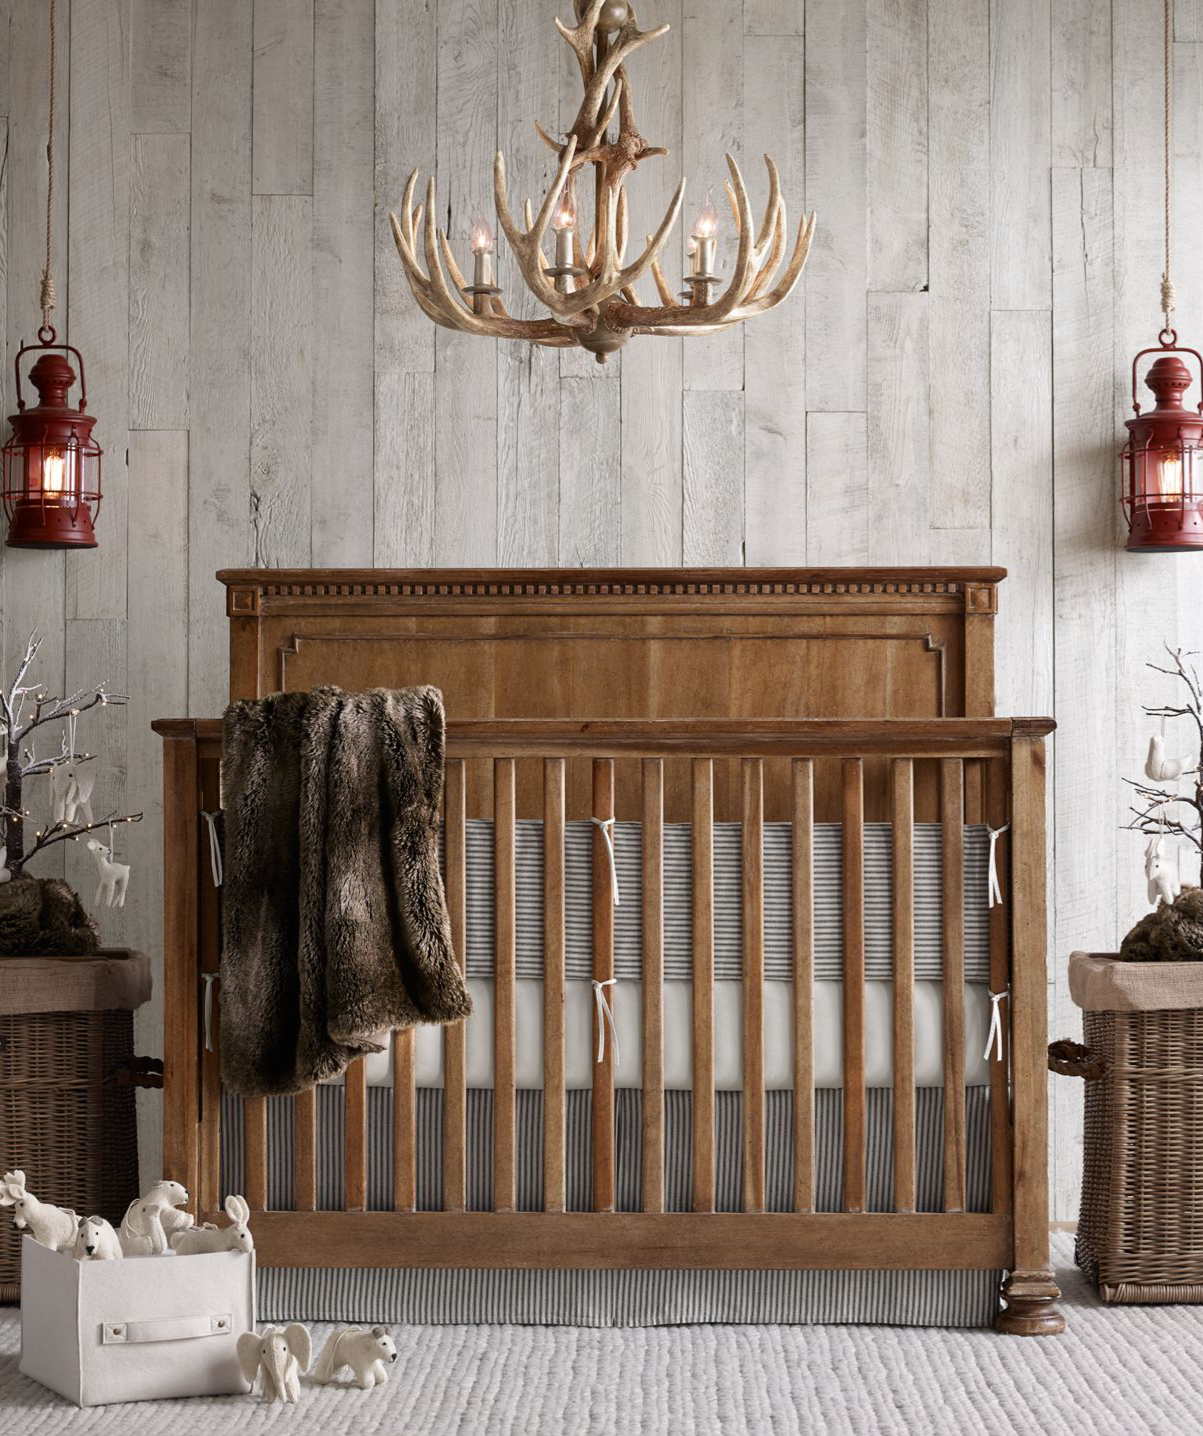 rustic nursery with outdoorsy accents. #rhbabyandchild